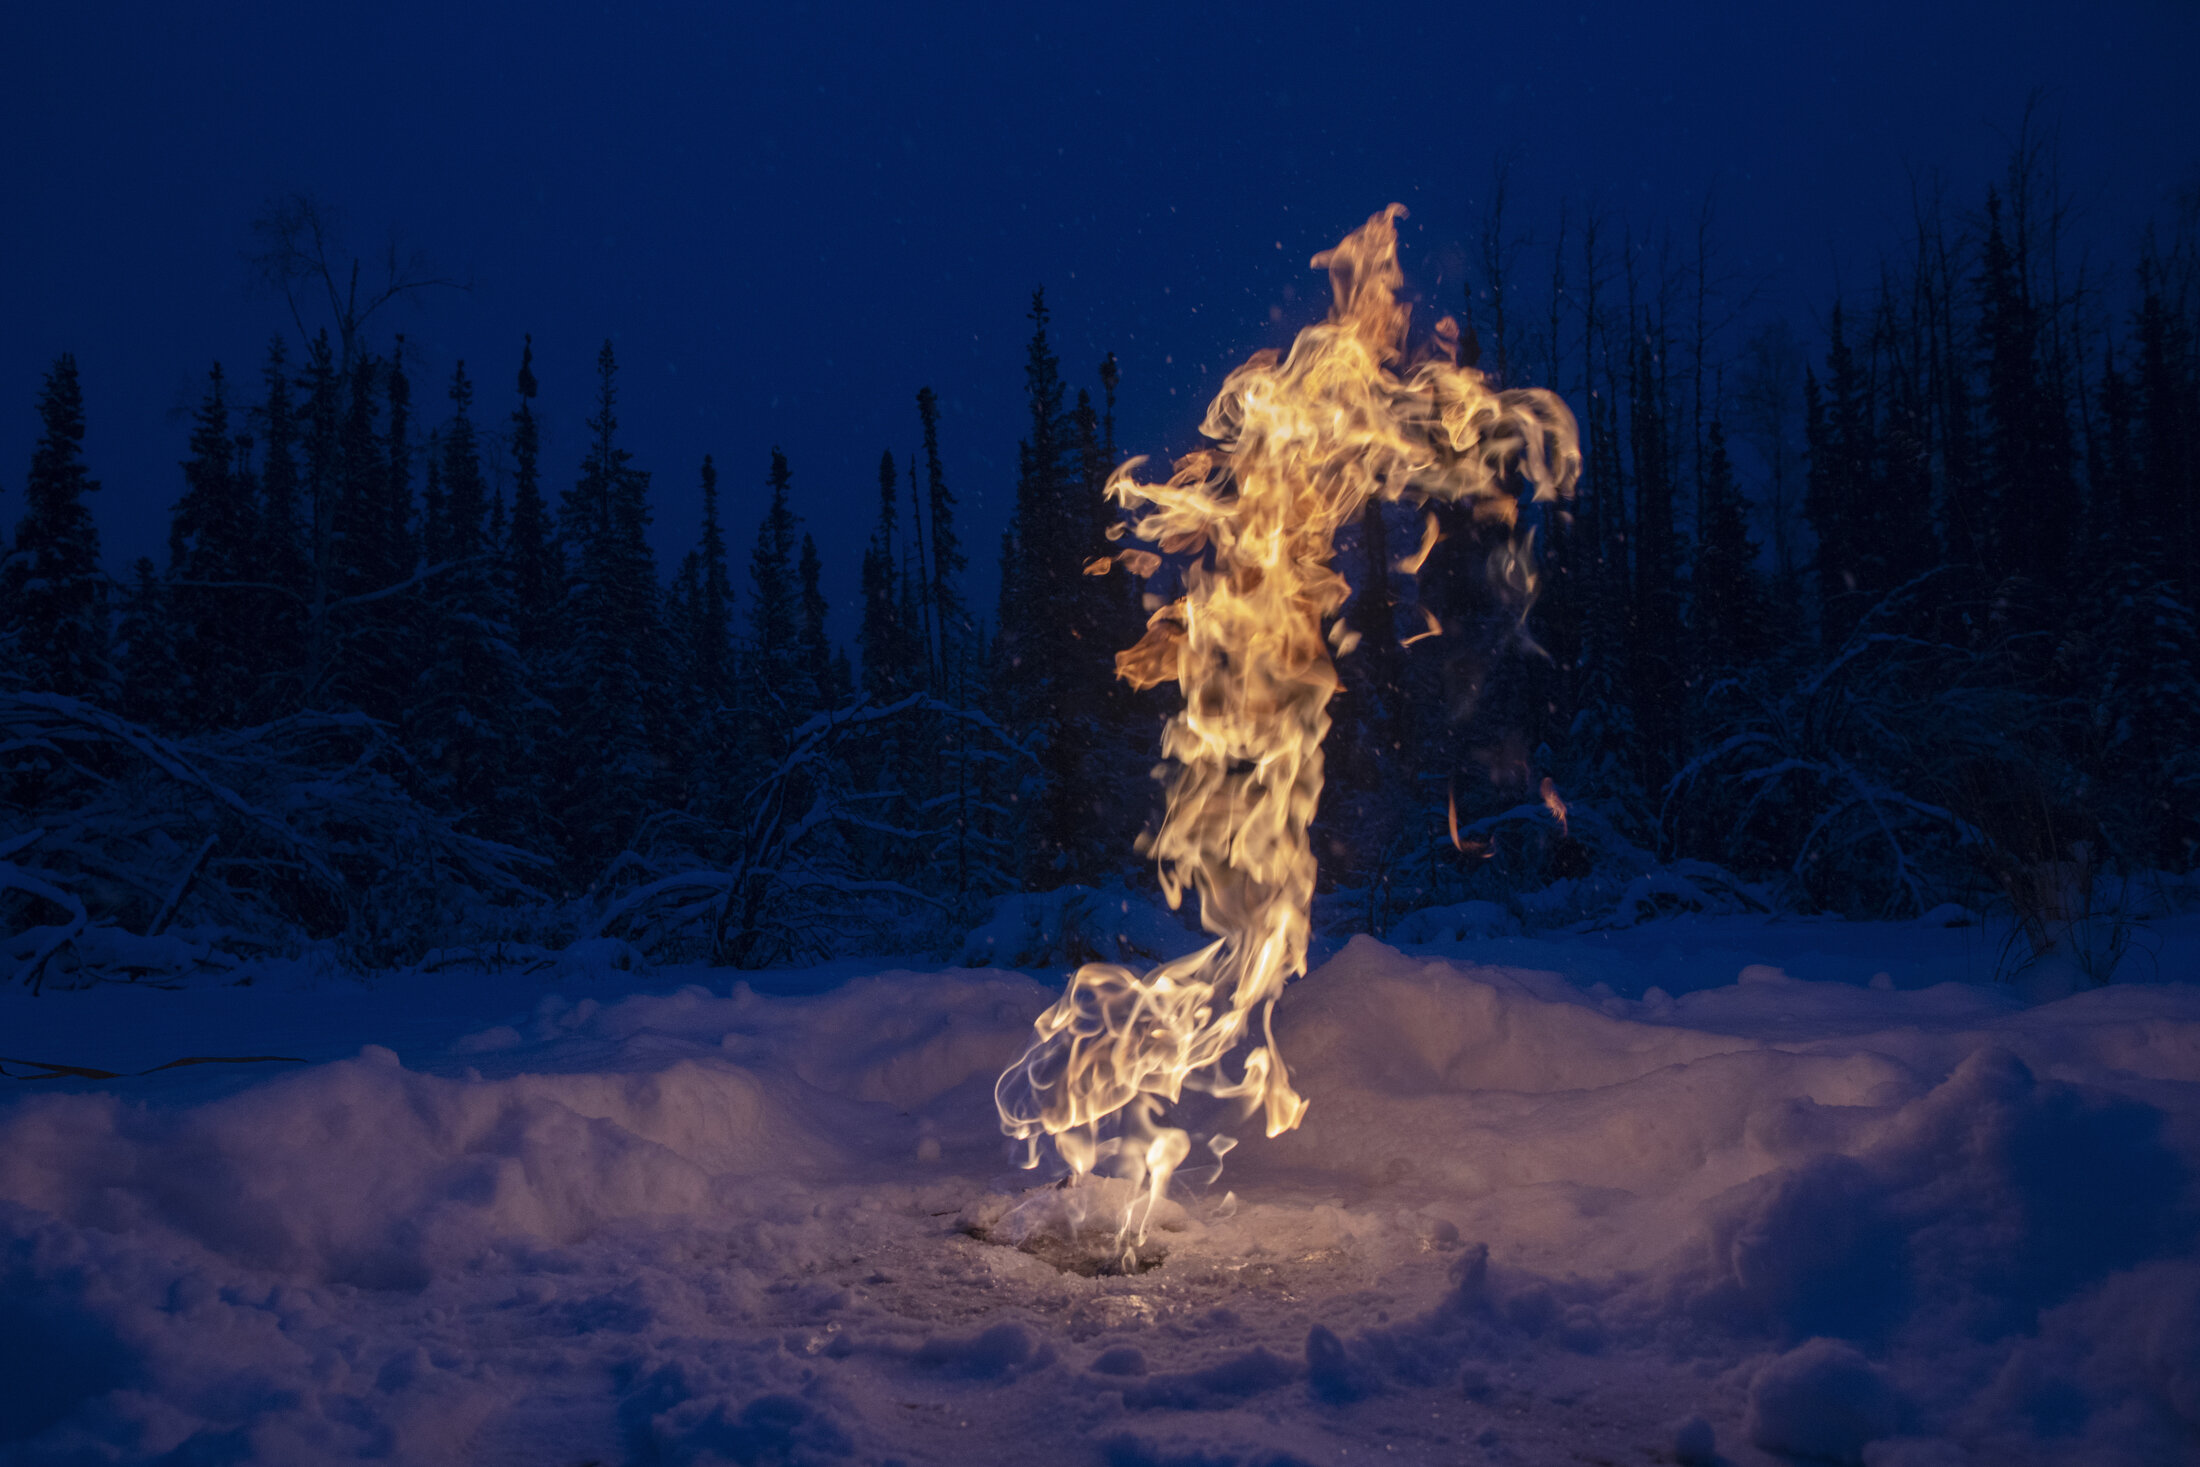  Thawing permafrost beneath the earth's surface releases methane gas into Arctic lakes causing gas bubbles to form in the frozen water. If the gas is released, just a small flame can create a huge (brief) fire on top of the lake's surface, as demonst